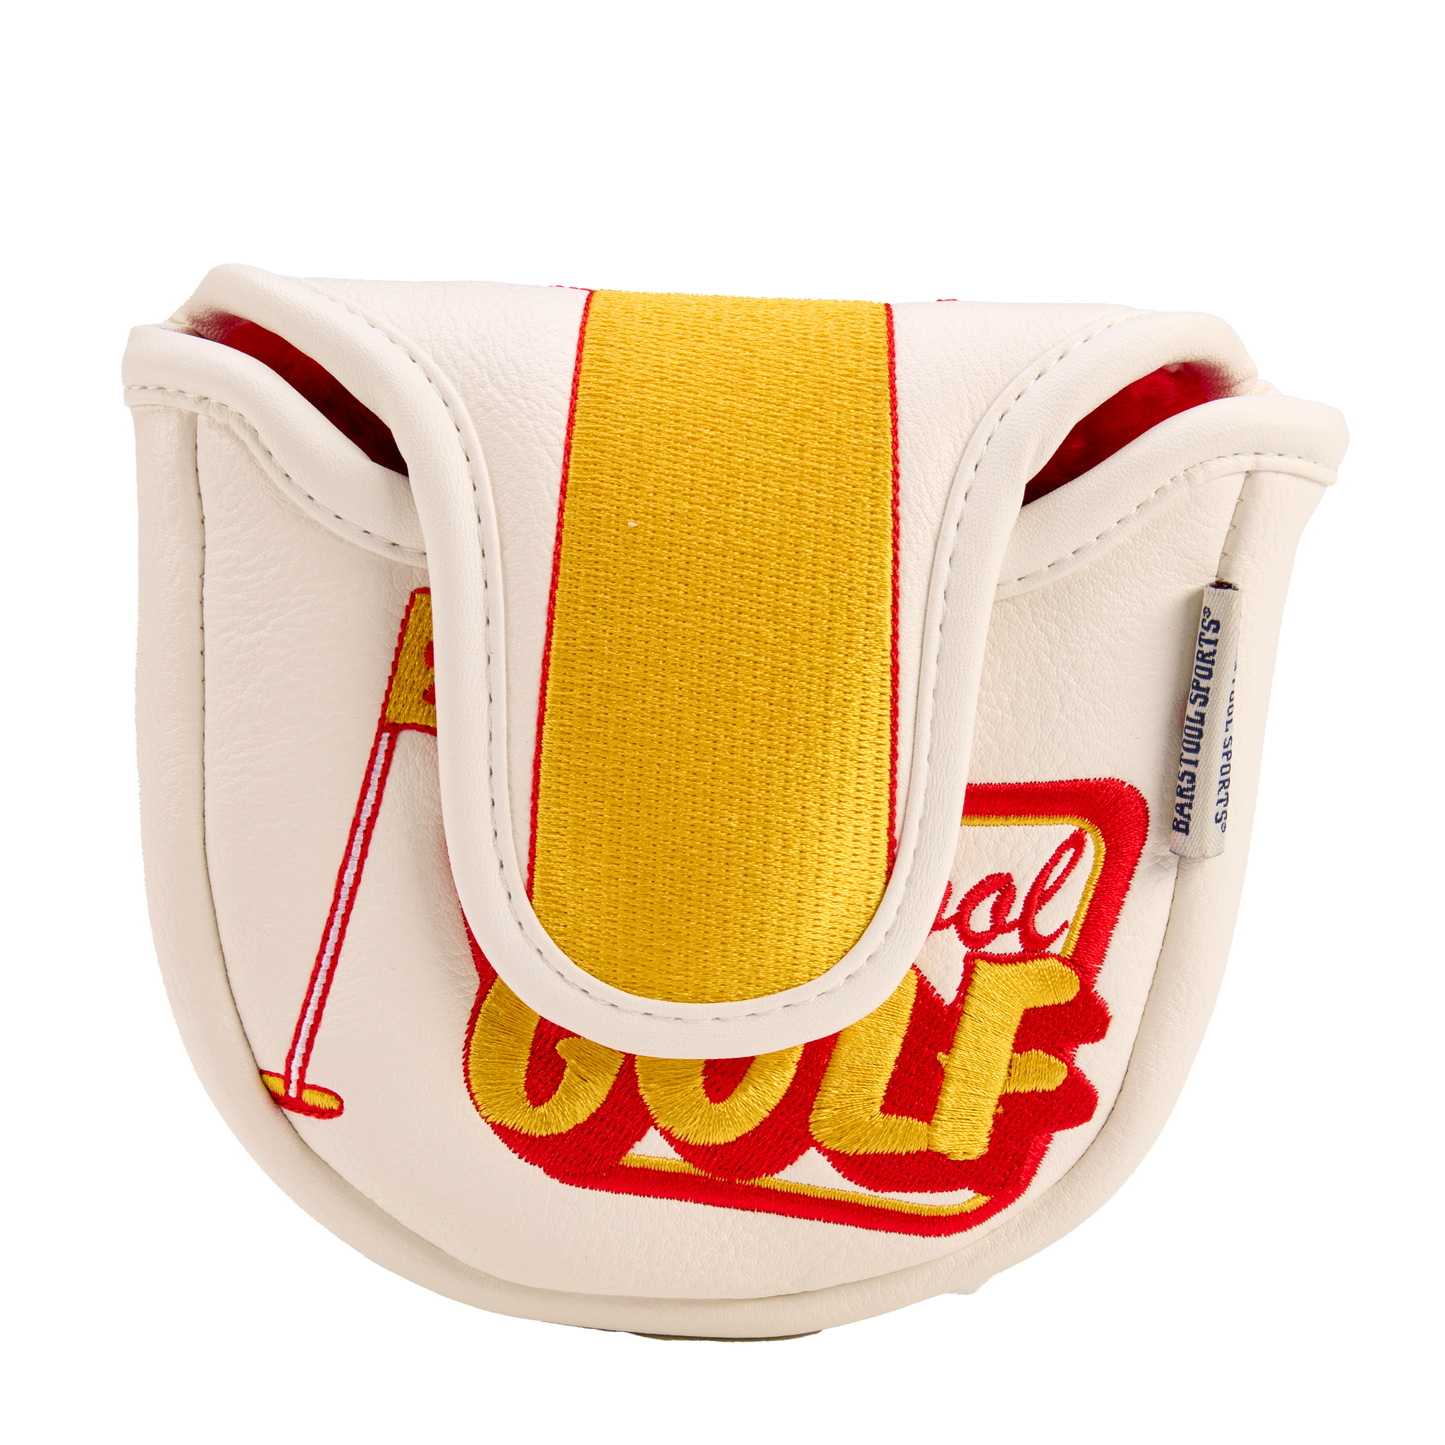 Barstool Golf "The Turn" Mallet Putter Cover